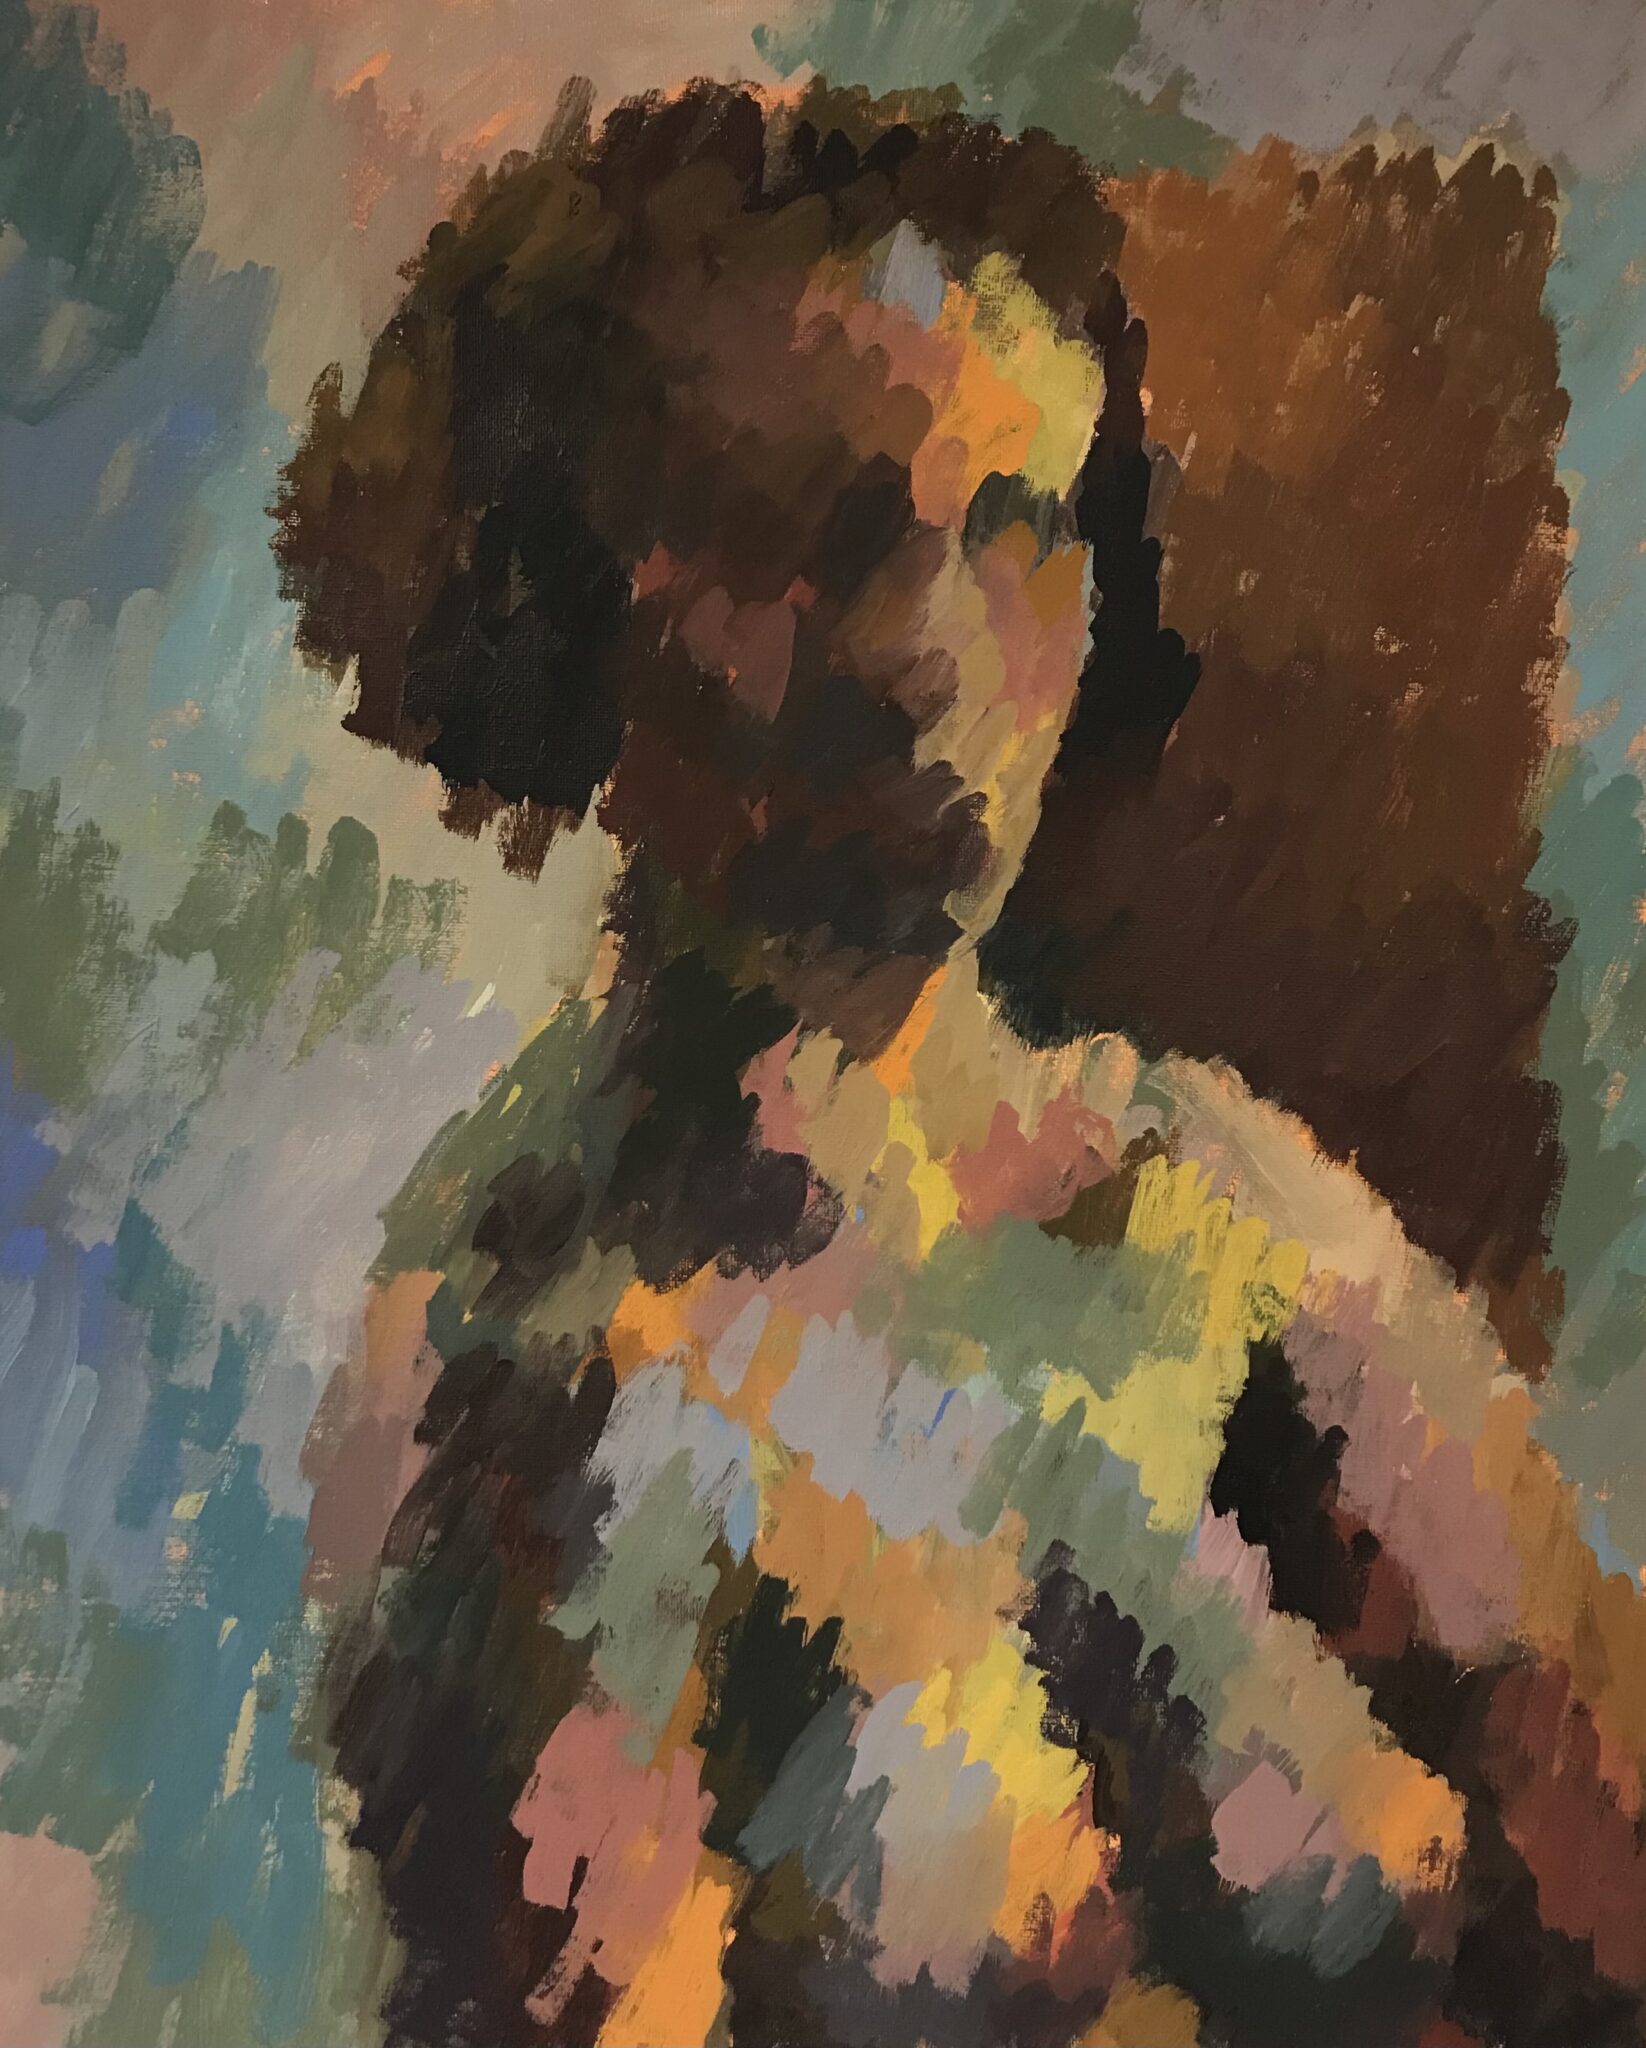 three quarter view portrait of woman using composed with abstract brush strokes, nude bust length composition, painted on a pre-prepared canvas board in oil paint